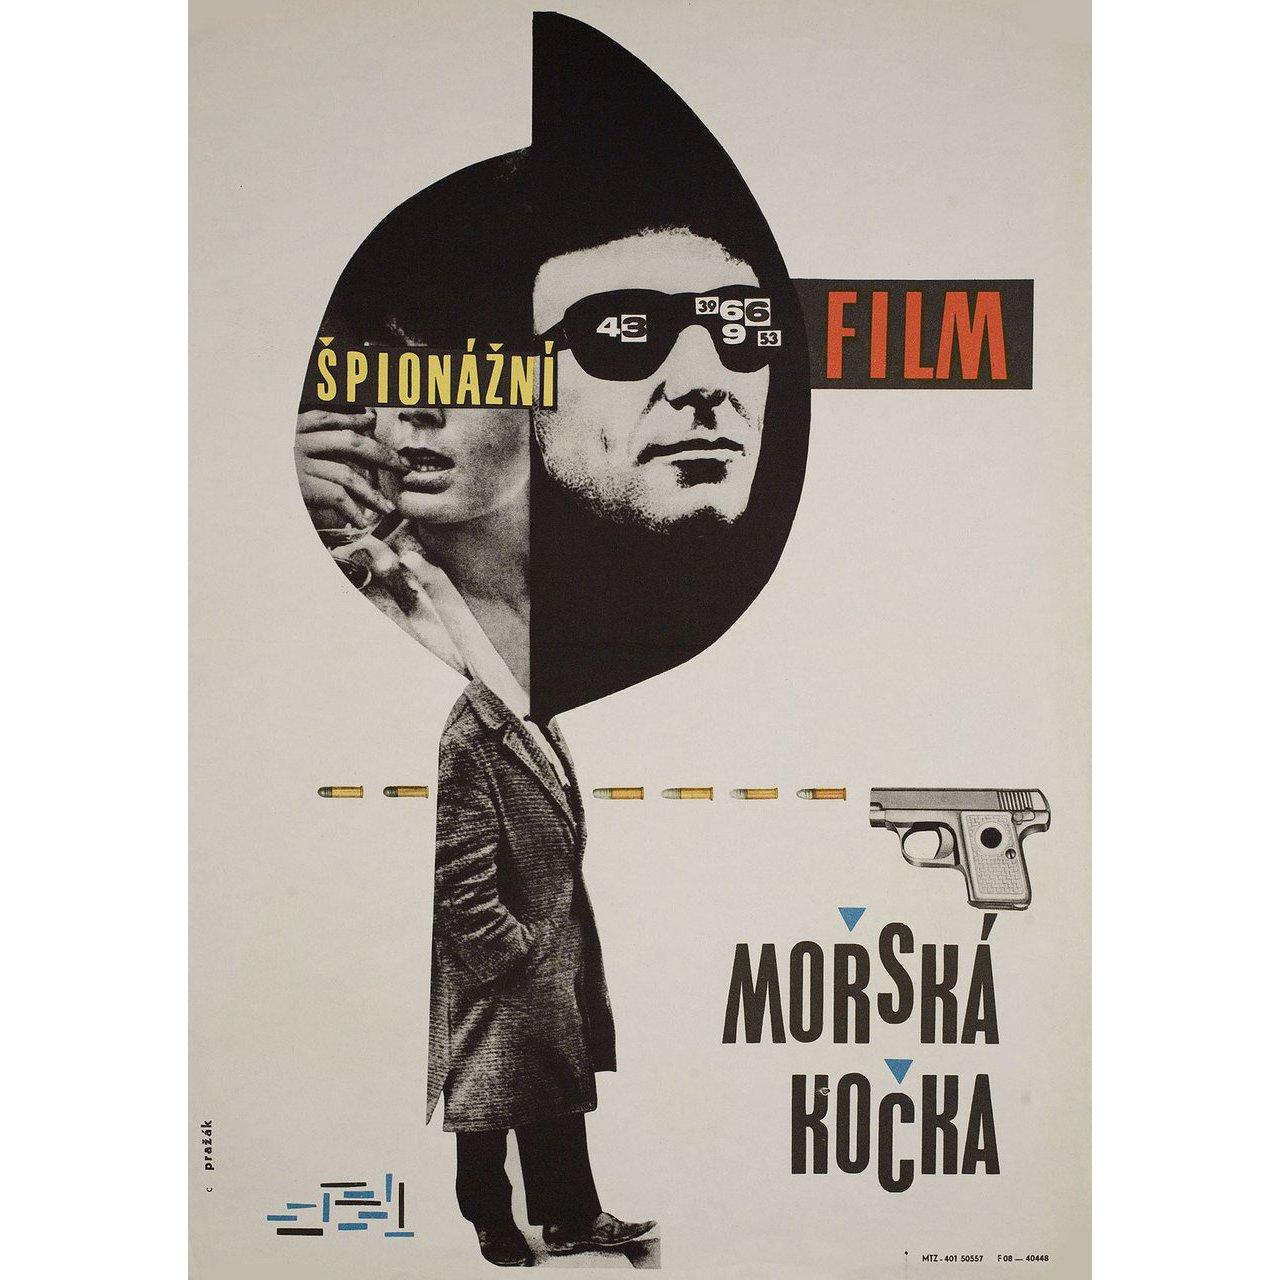 Original 1965 Czech A3 poster by Cenek Prazak for the film Pisica de mare directed by Gheorghe Turcu with Leopoldina Balanuta / Haralambie Boros / Iurie Darie / Toma Dimitriu. Fine condition, folded. Many original posters were issued folded or were